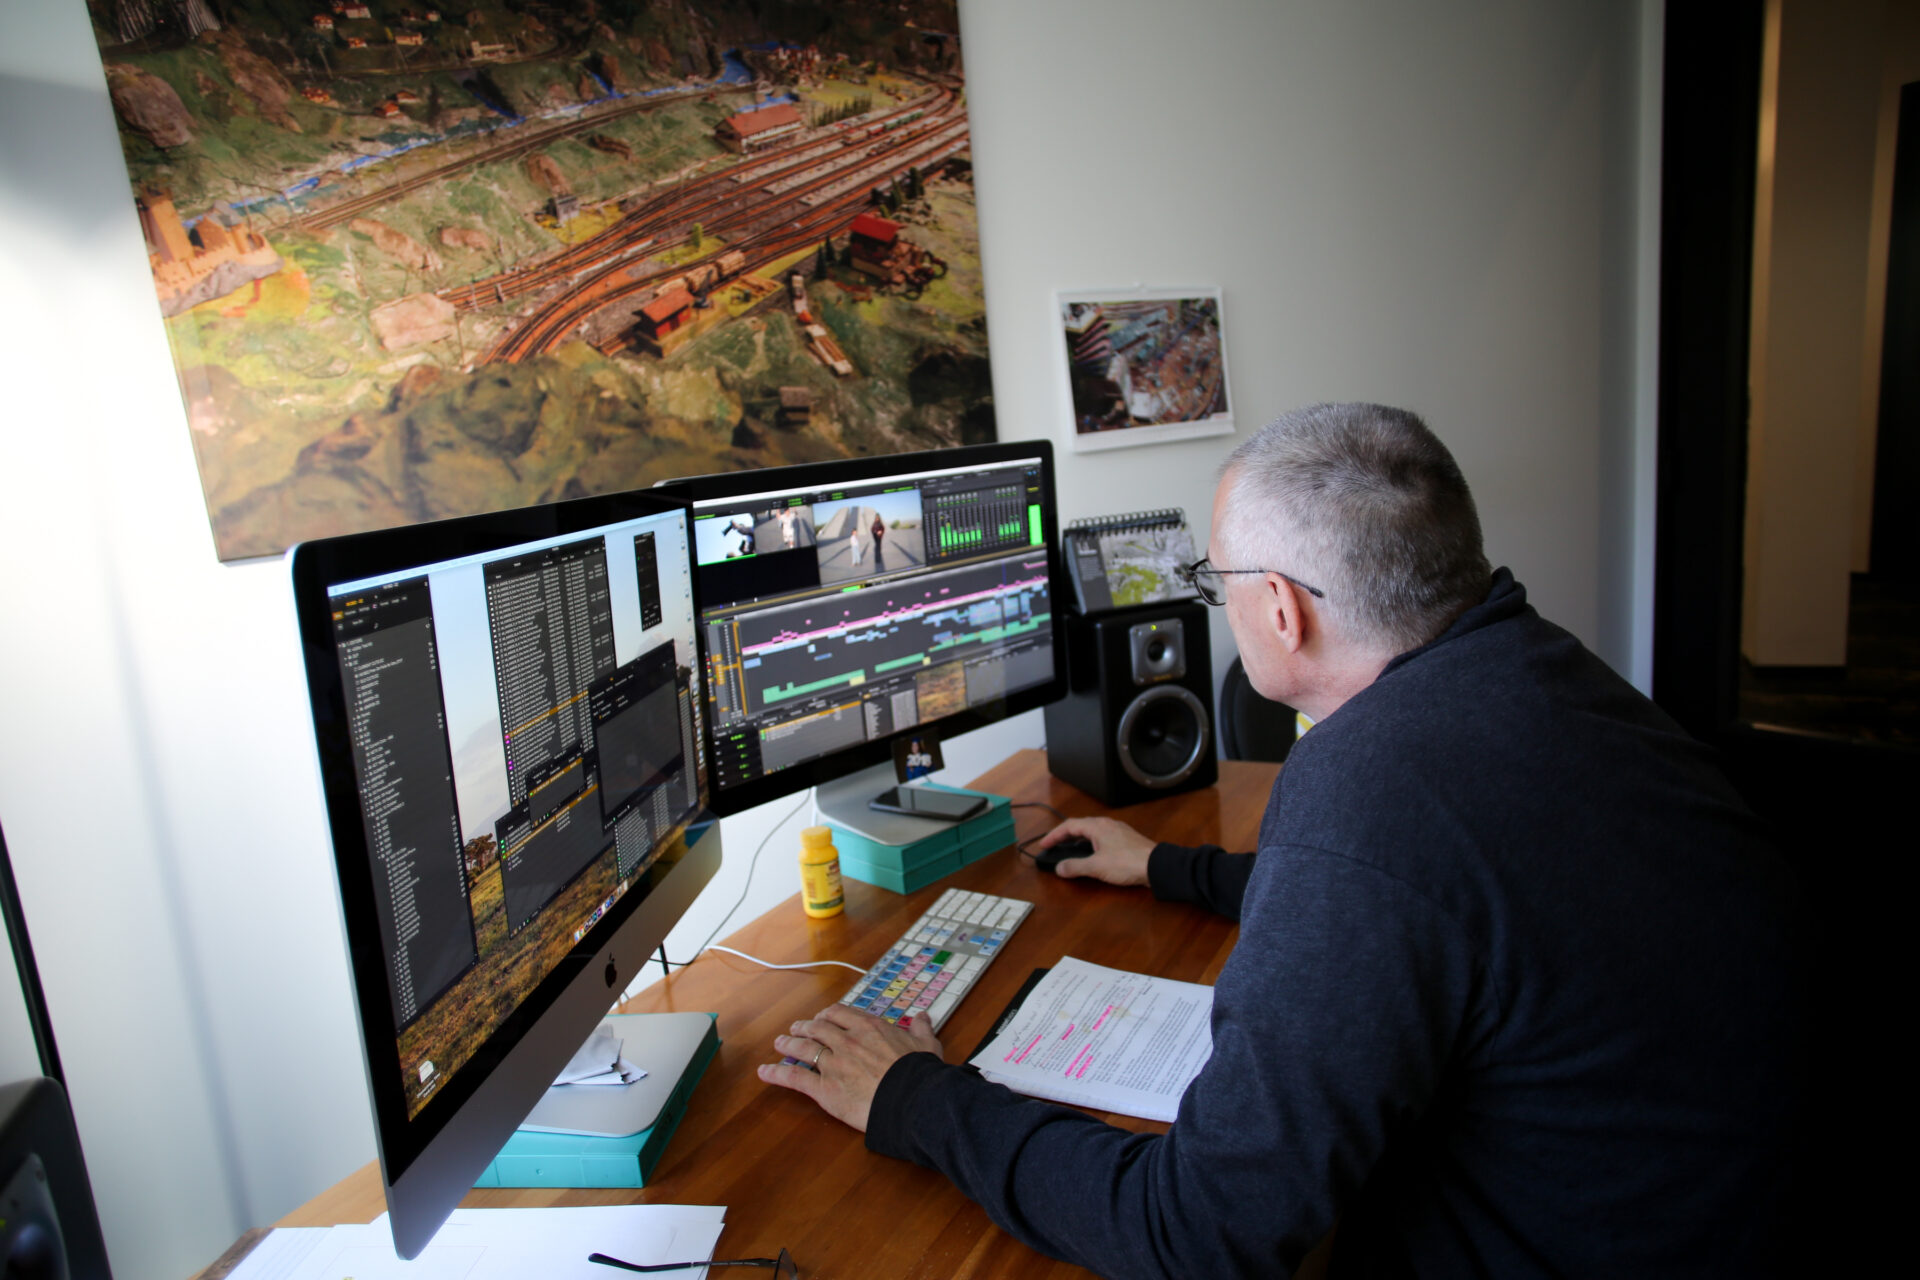 A picture of a man editing on his Media Composer edit computer.